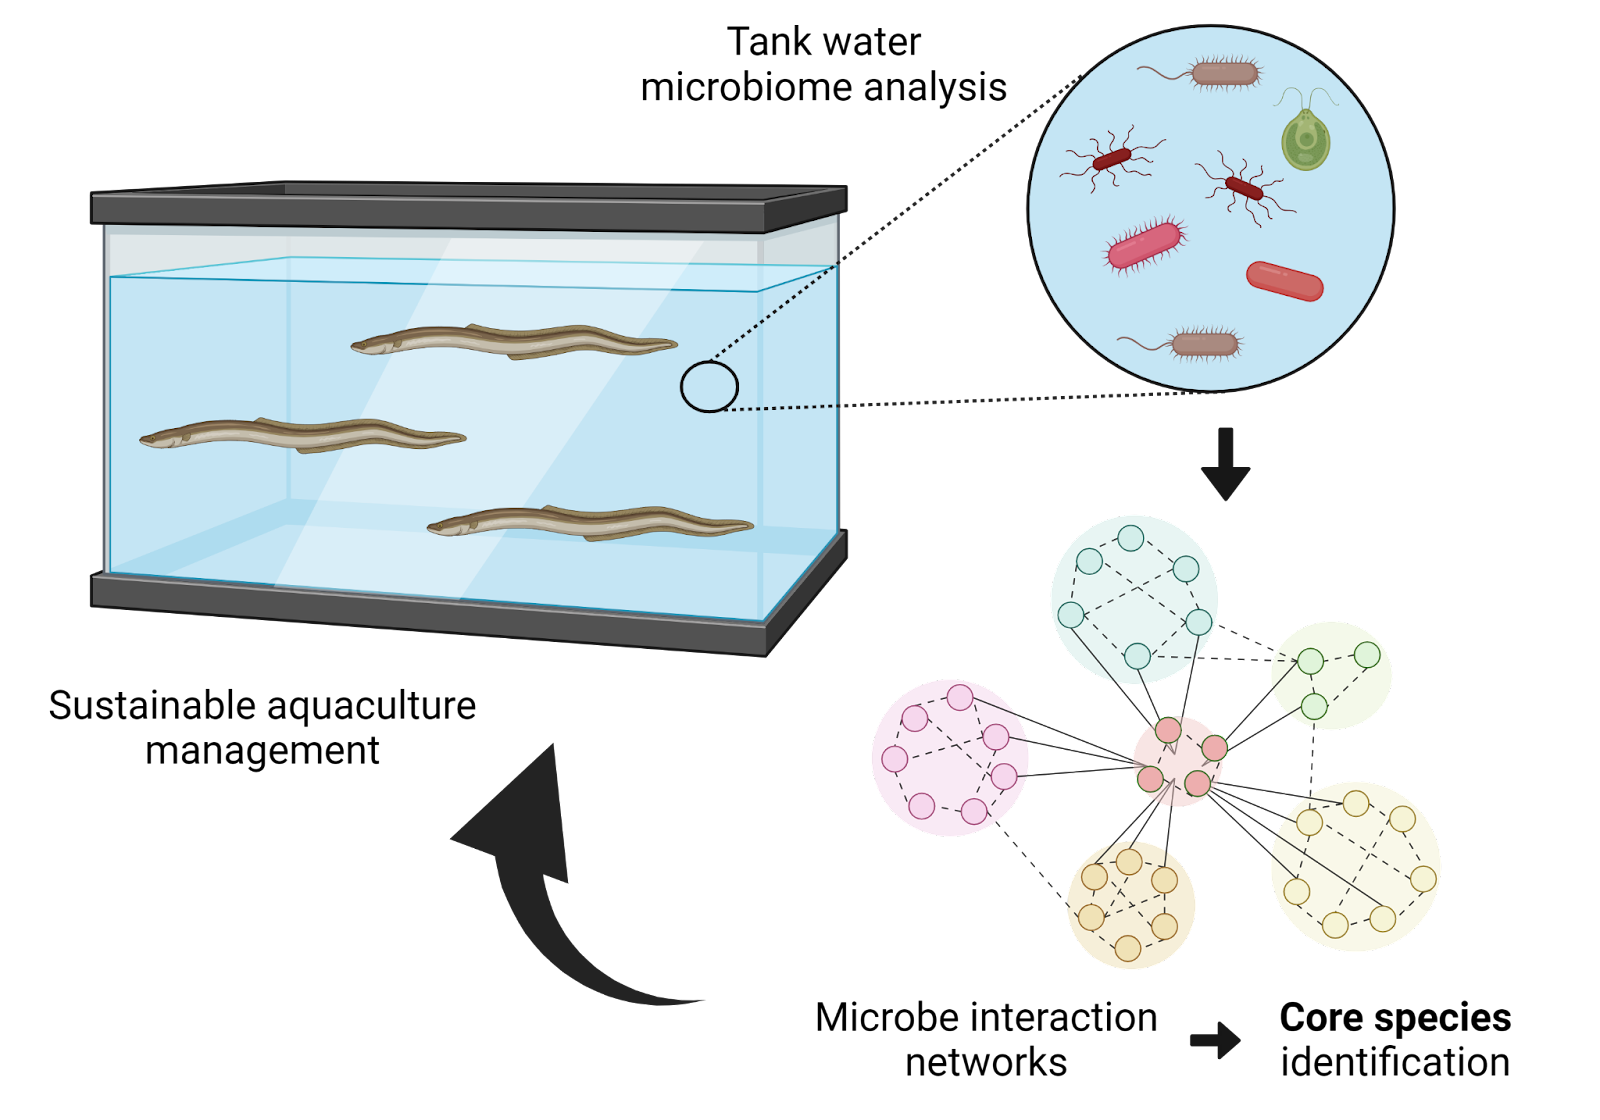 Microbial networks for sustainable aquaculture